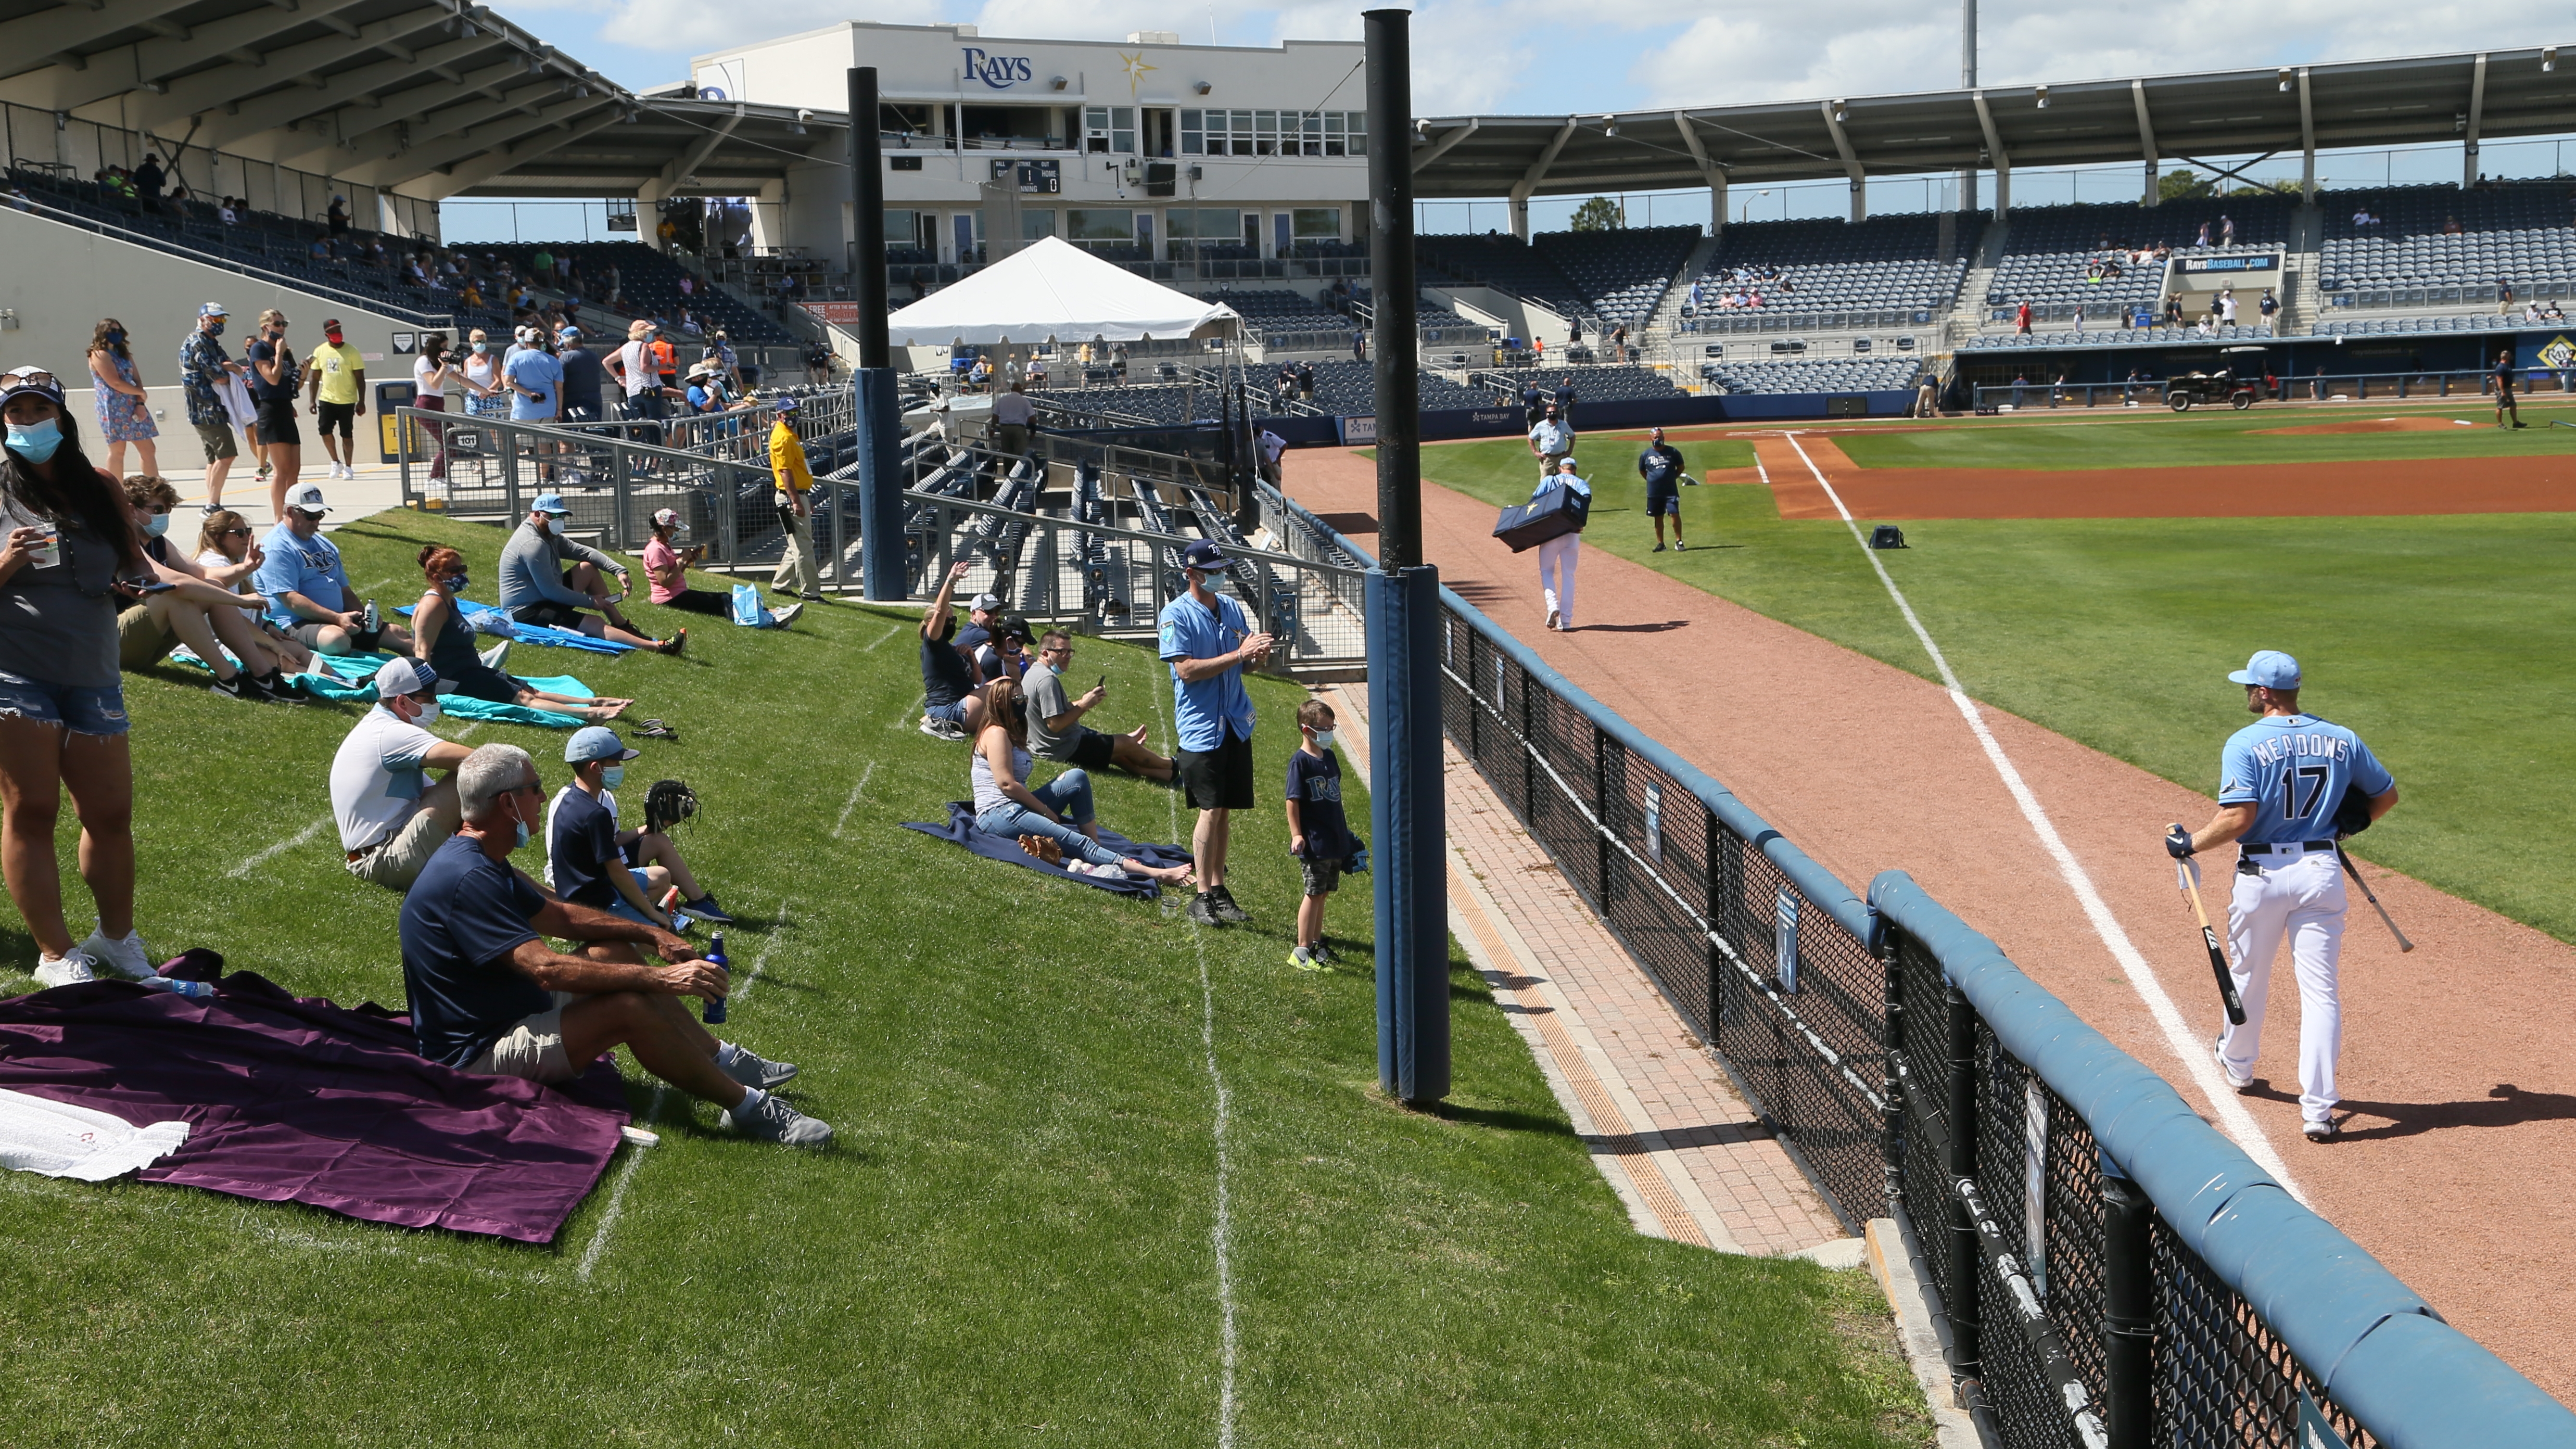 Rays returning to Port Charlotte for spring training next year